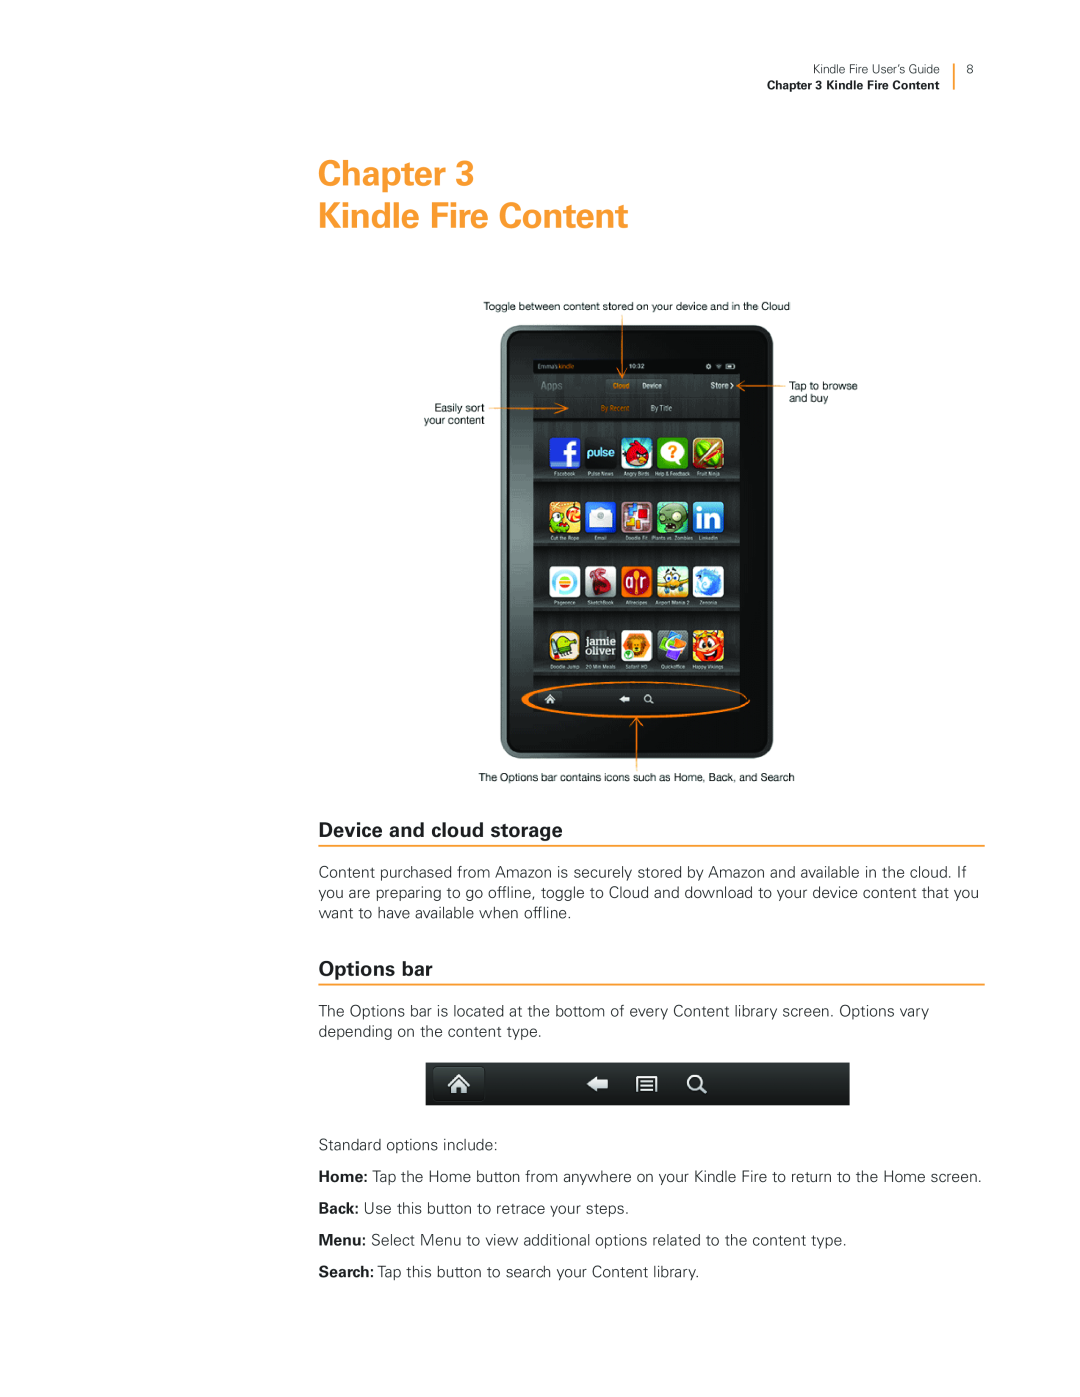 Amazon B0051VVOB2, KNDFRHD16, 23-000454-01, KNDFR8WIFI manual Kindle Fire Content, Device and cloud storage, Options bar 